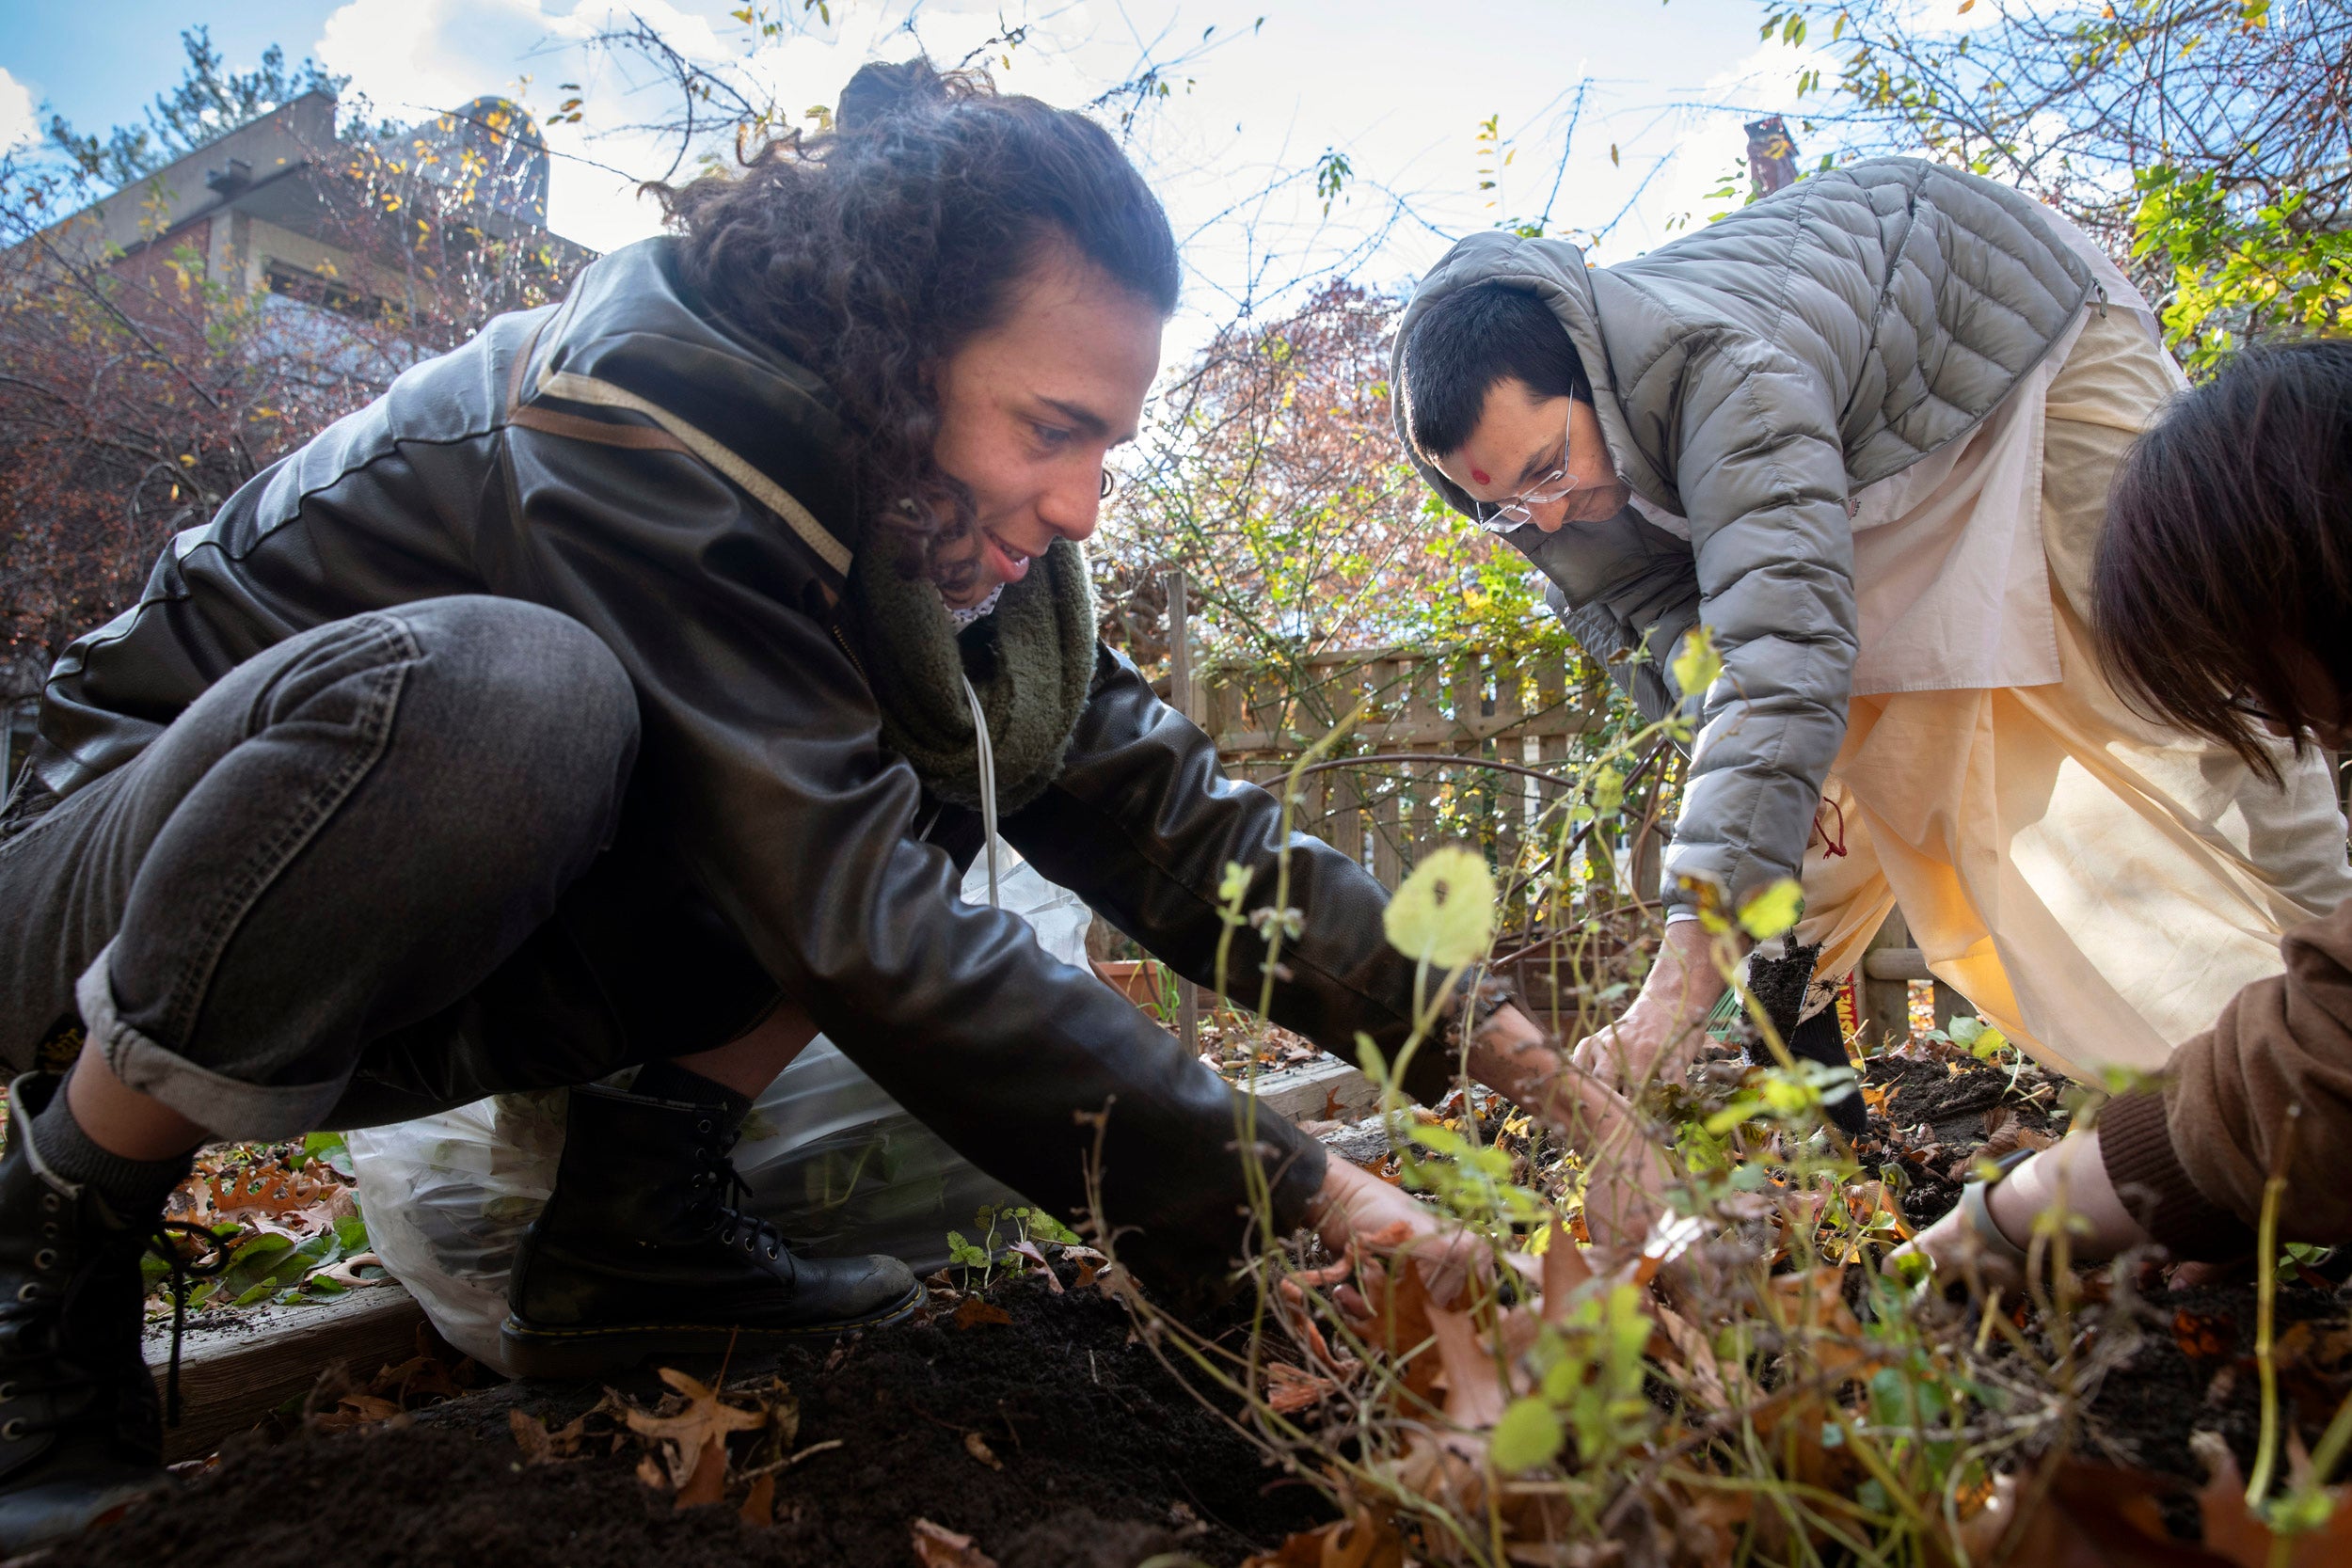 Divinity School students Naomi Fastovsky (left) and Venerable Vandan Sadhak get their hands dirty at the harvest party in their garden.